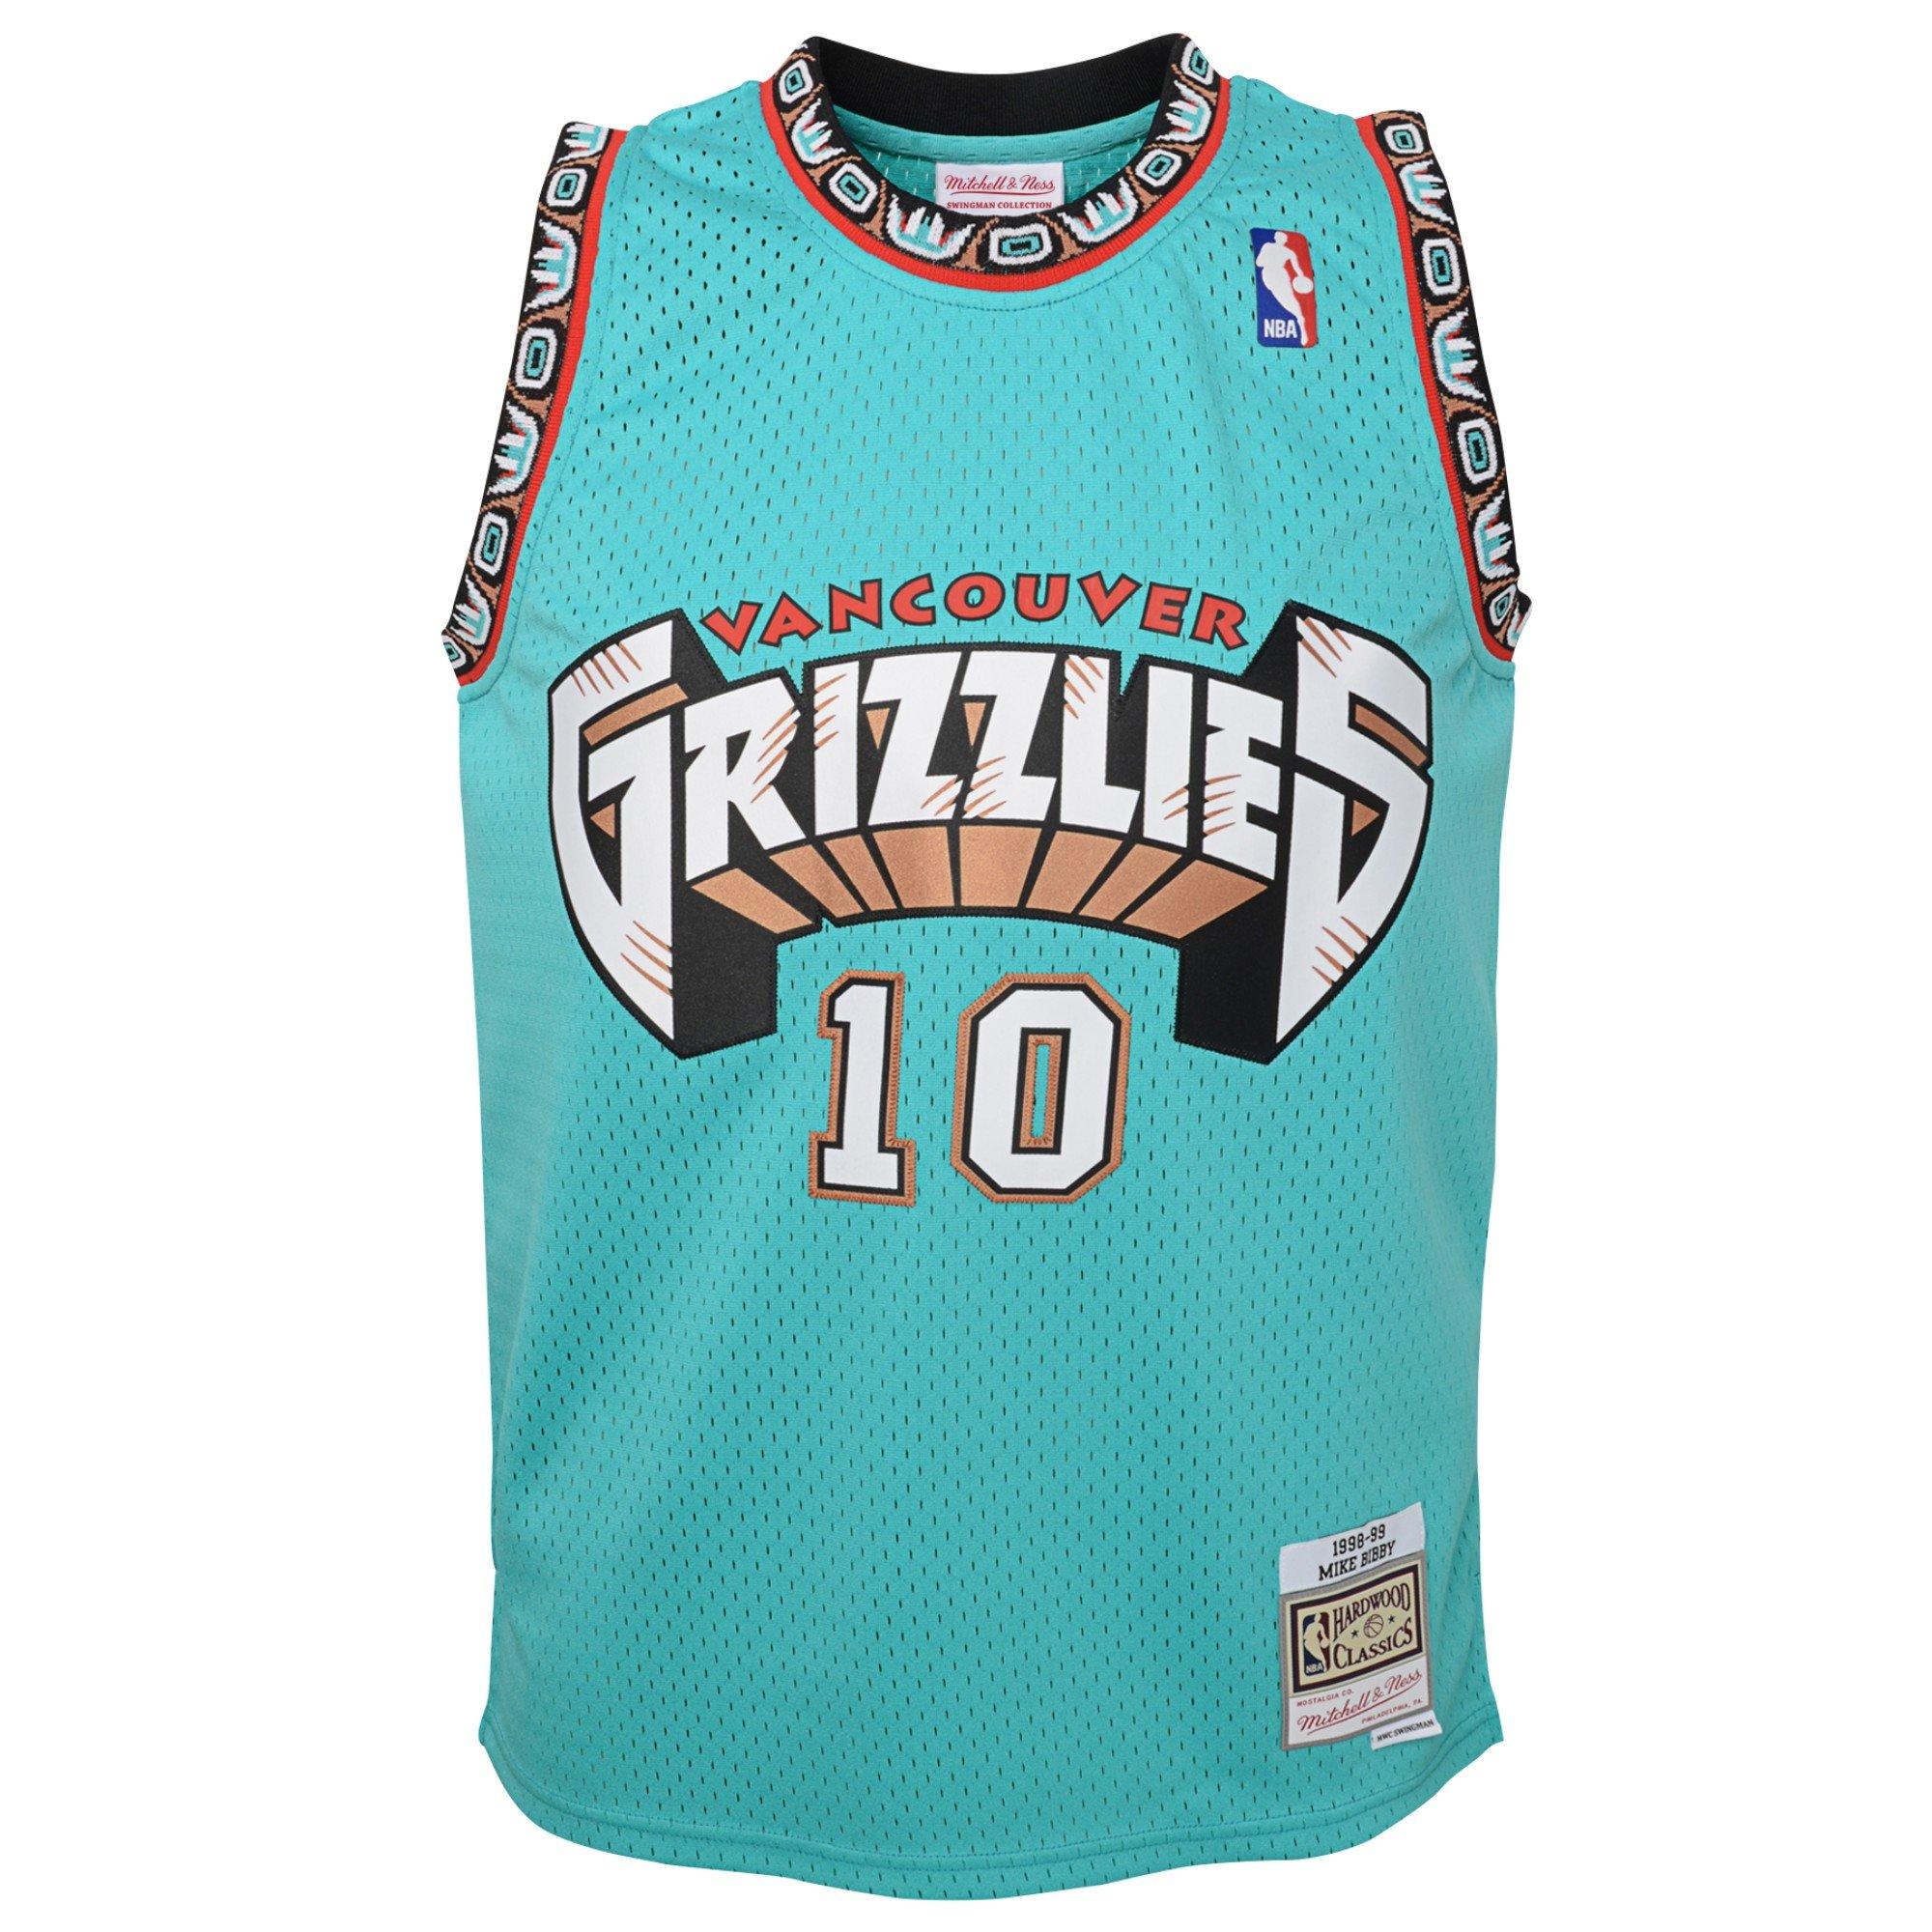 Vancouver Grizzlies Mike Bibby White jersey-NBA NWT by Mitchell